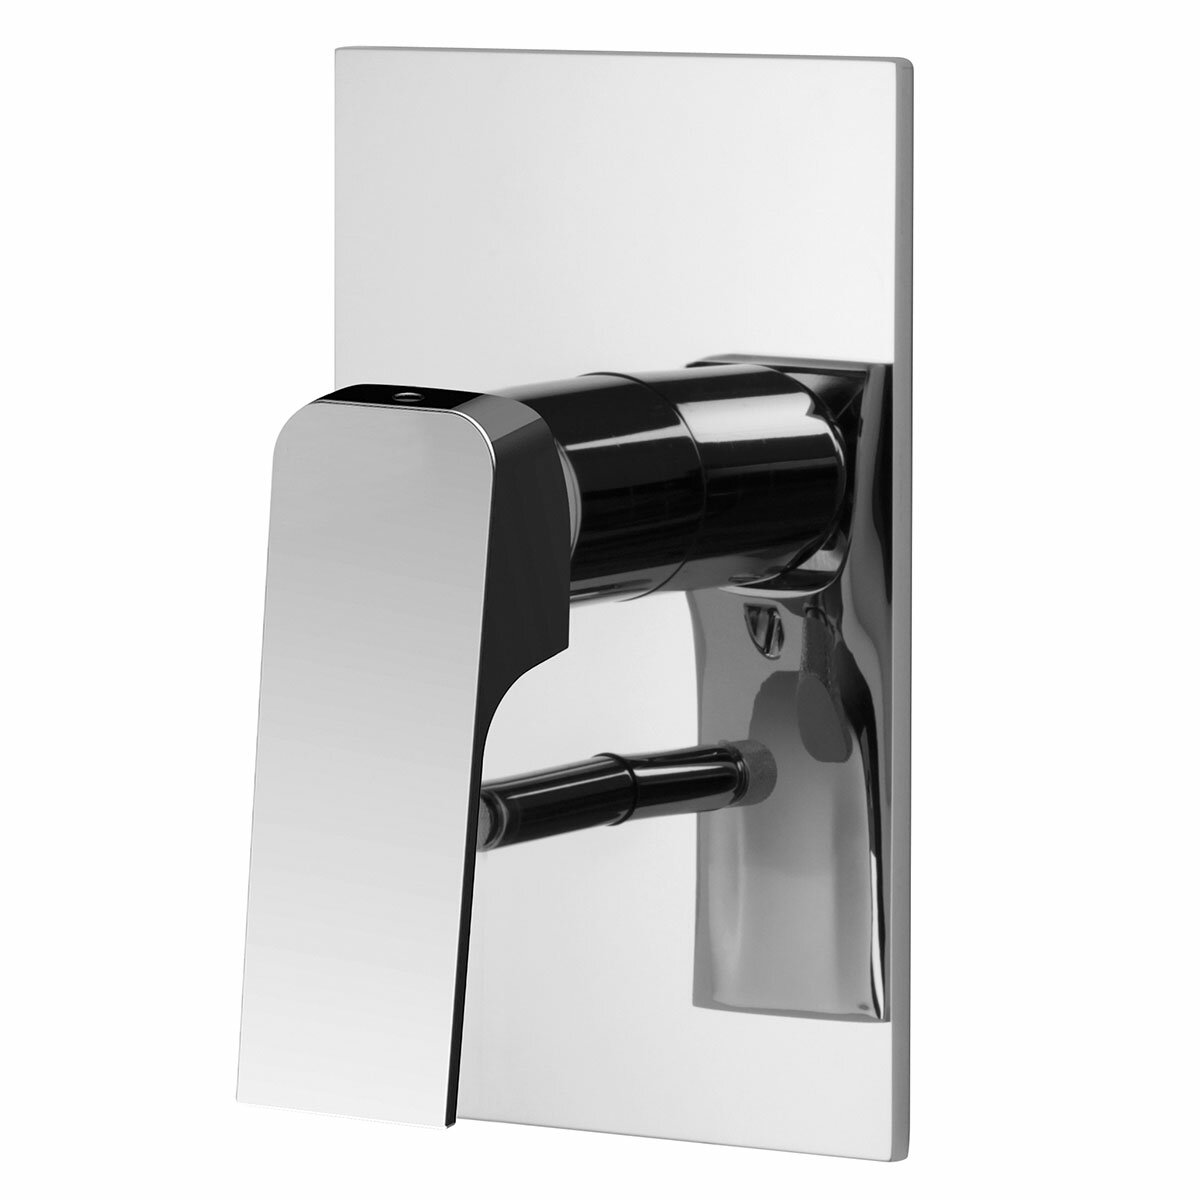 Fima Carlo Frattini FIT Series built-in shower mixer with diverter; outside part only